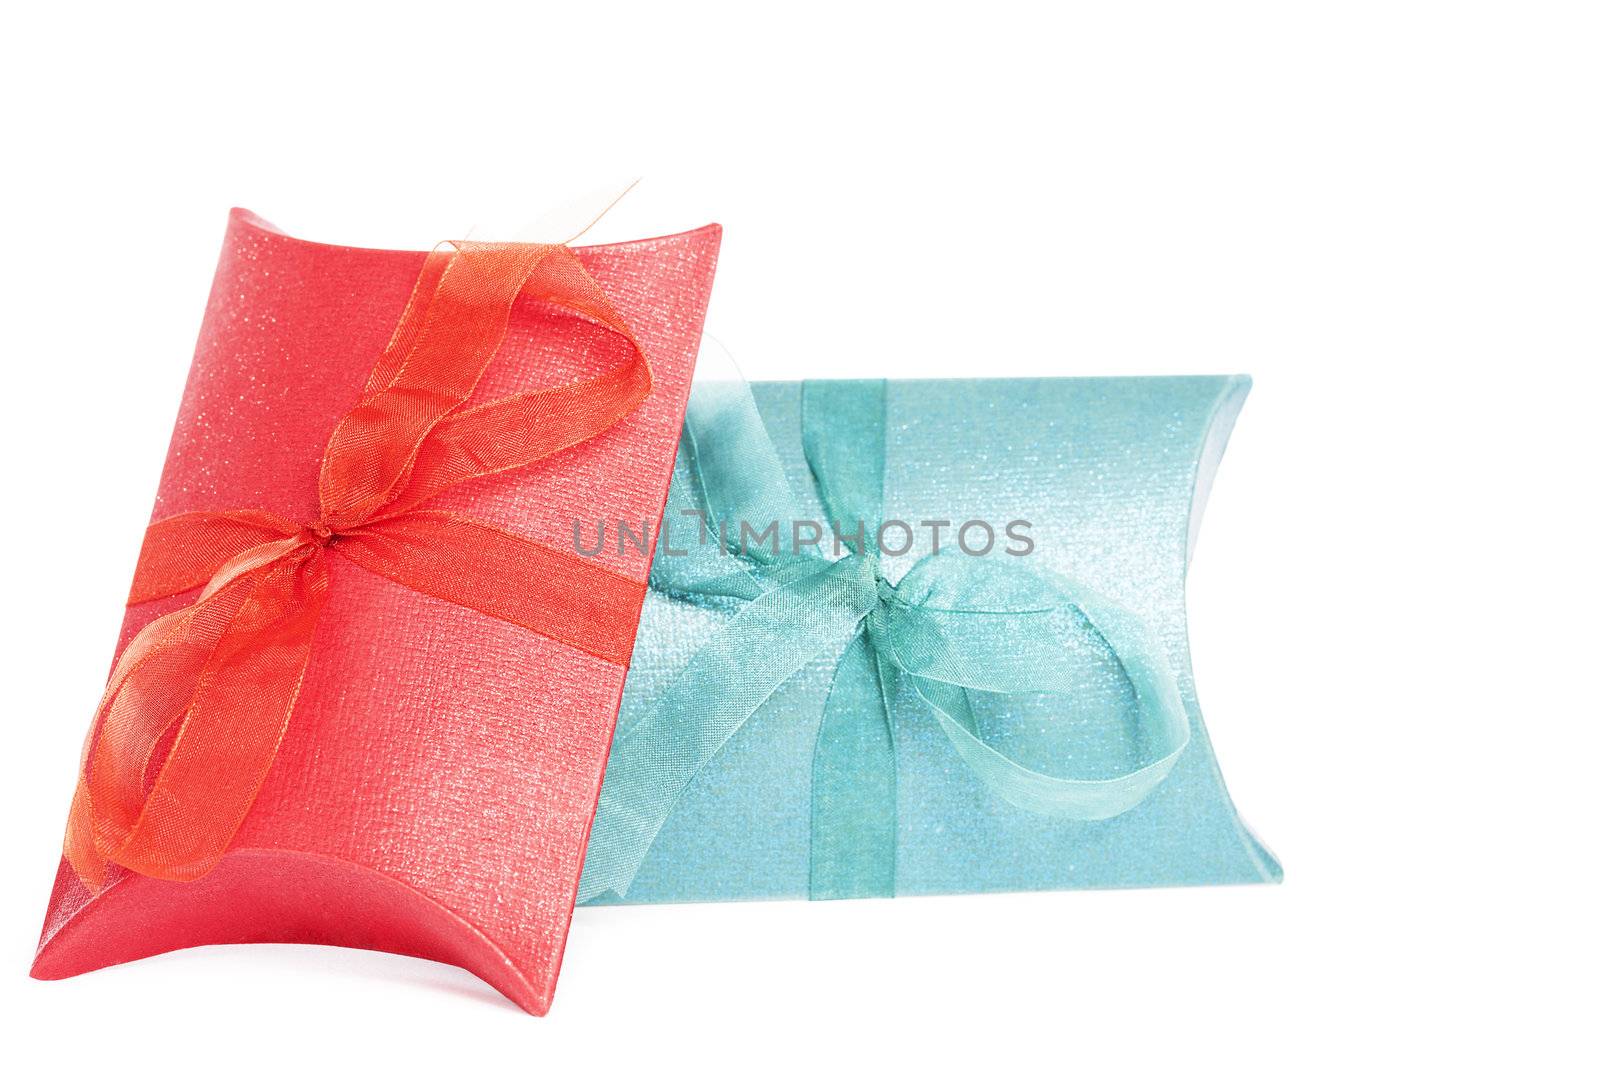 small red and blue present boxes on white background